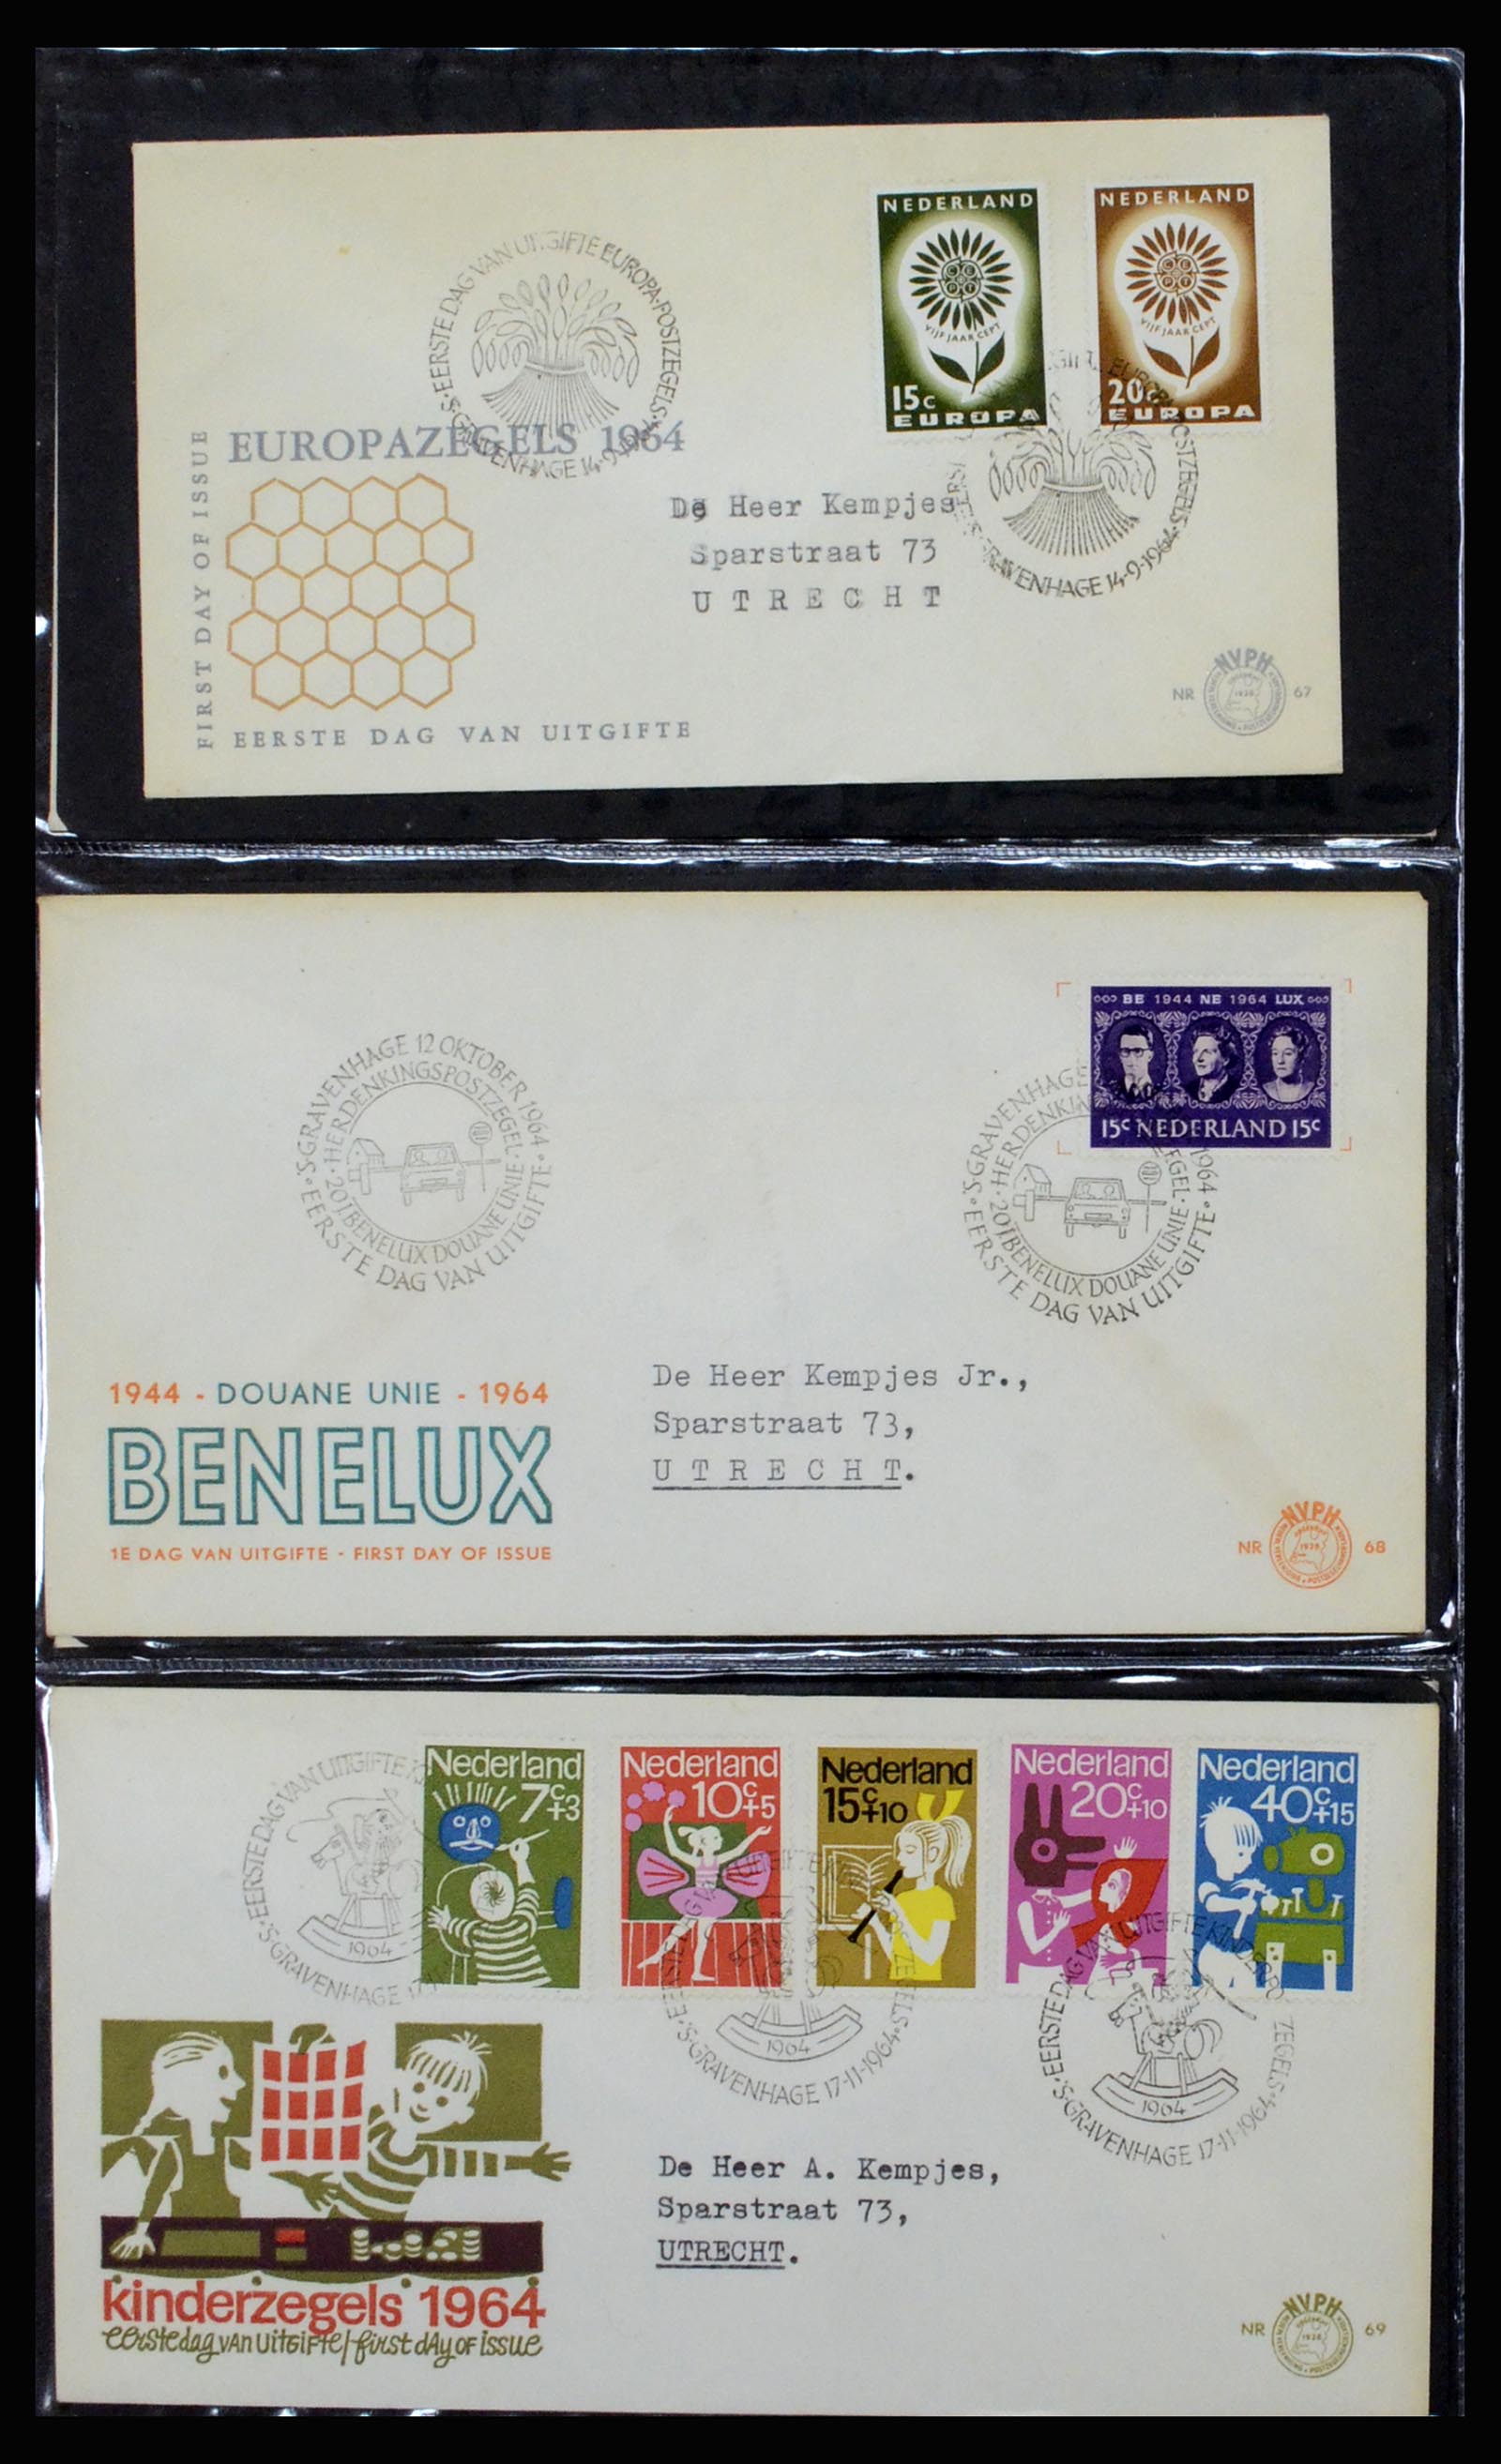 37197 024 - Stamp collection 37197 Netherlands FDC's 1950-2004.